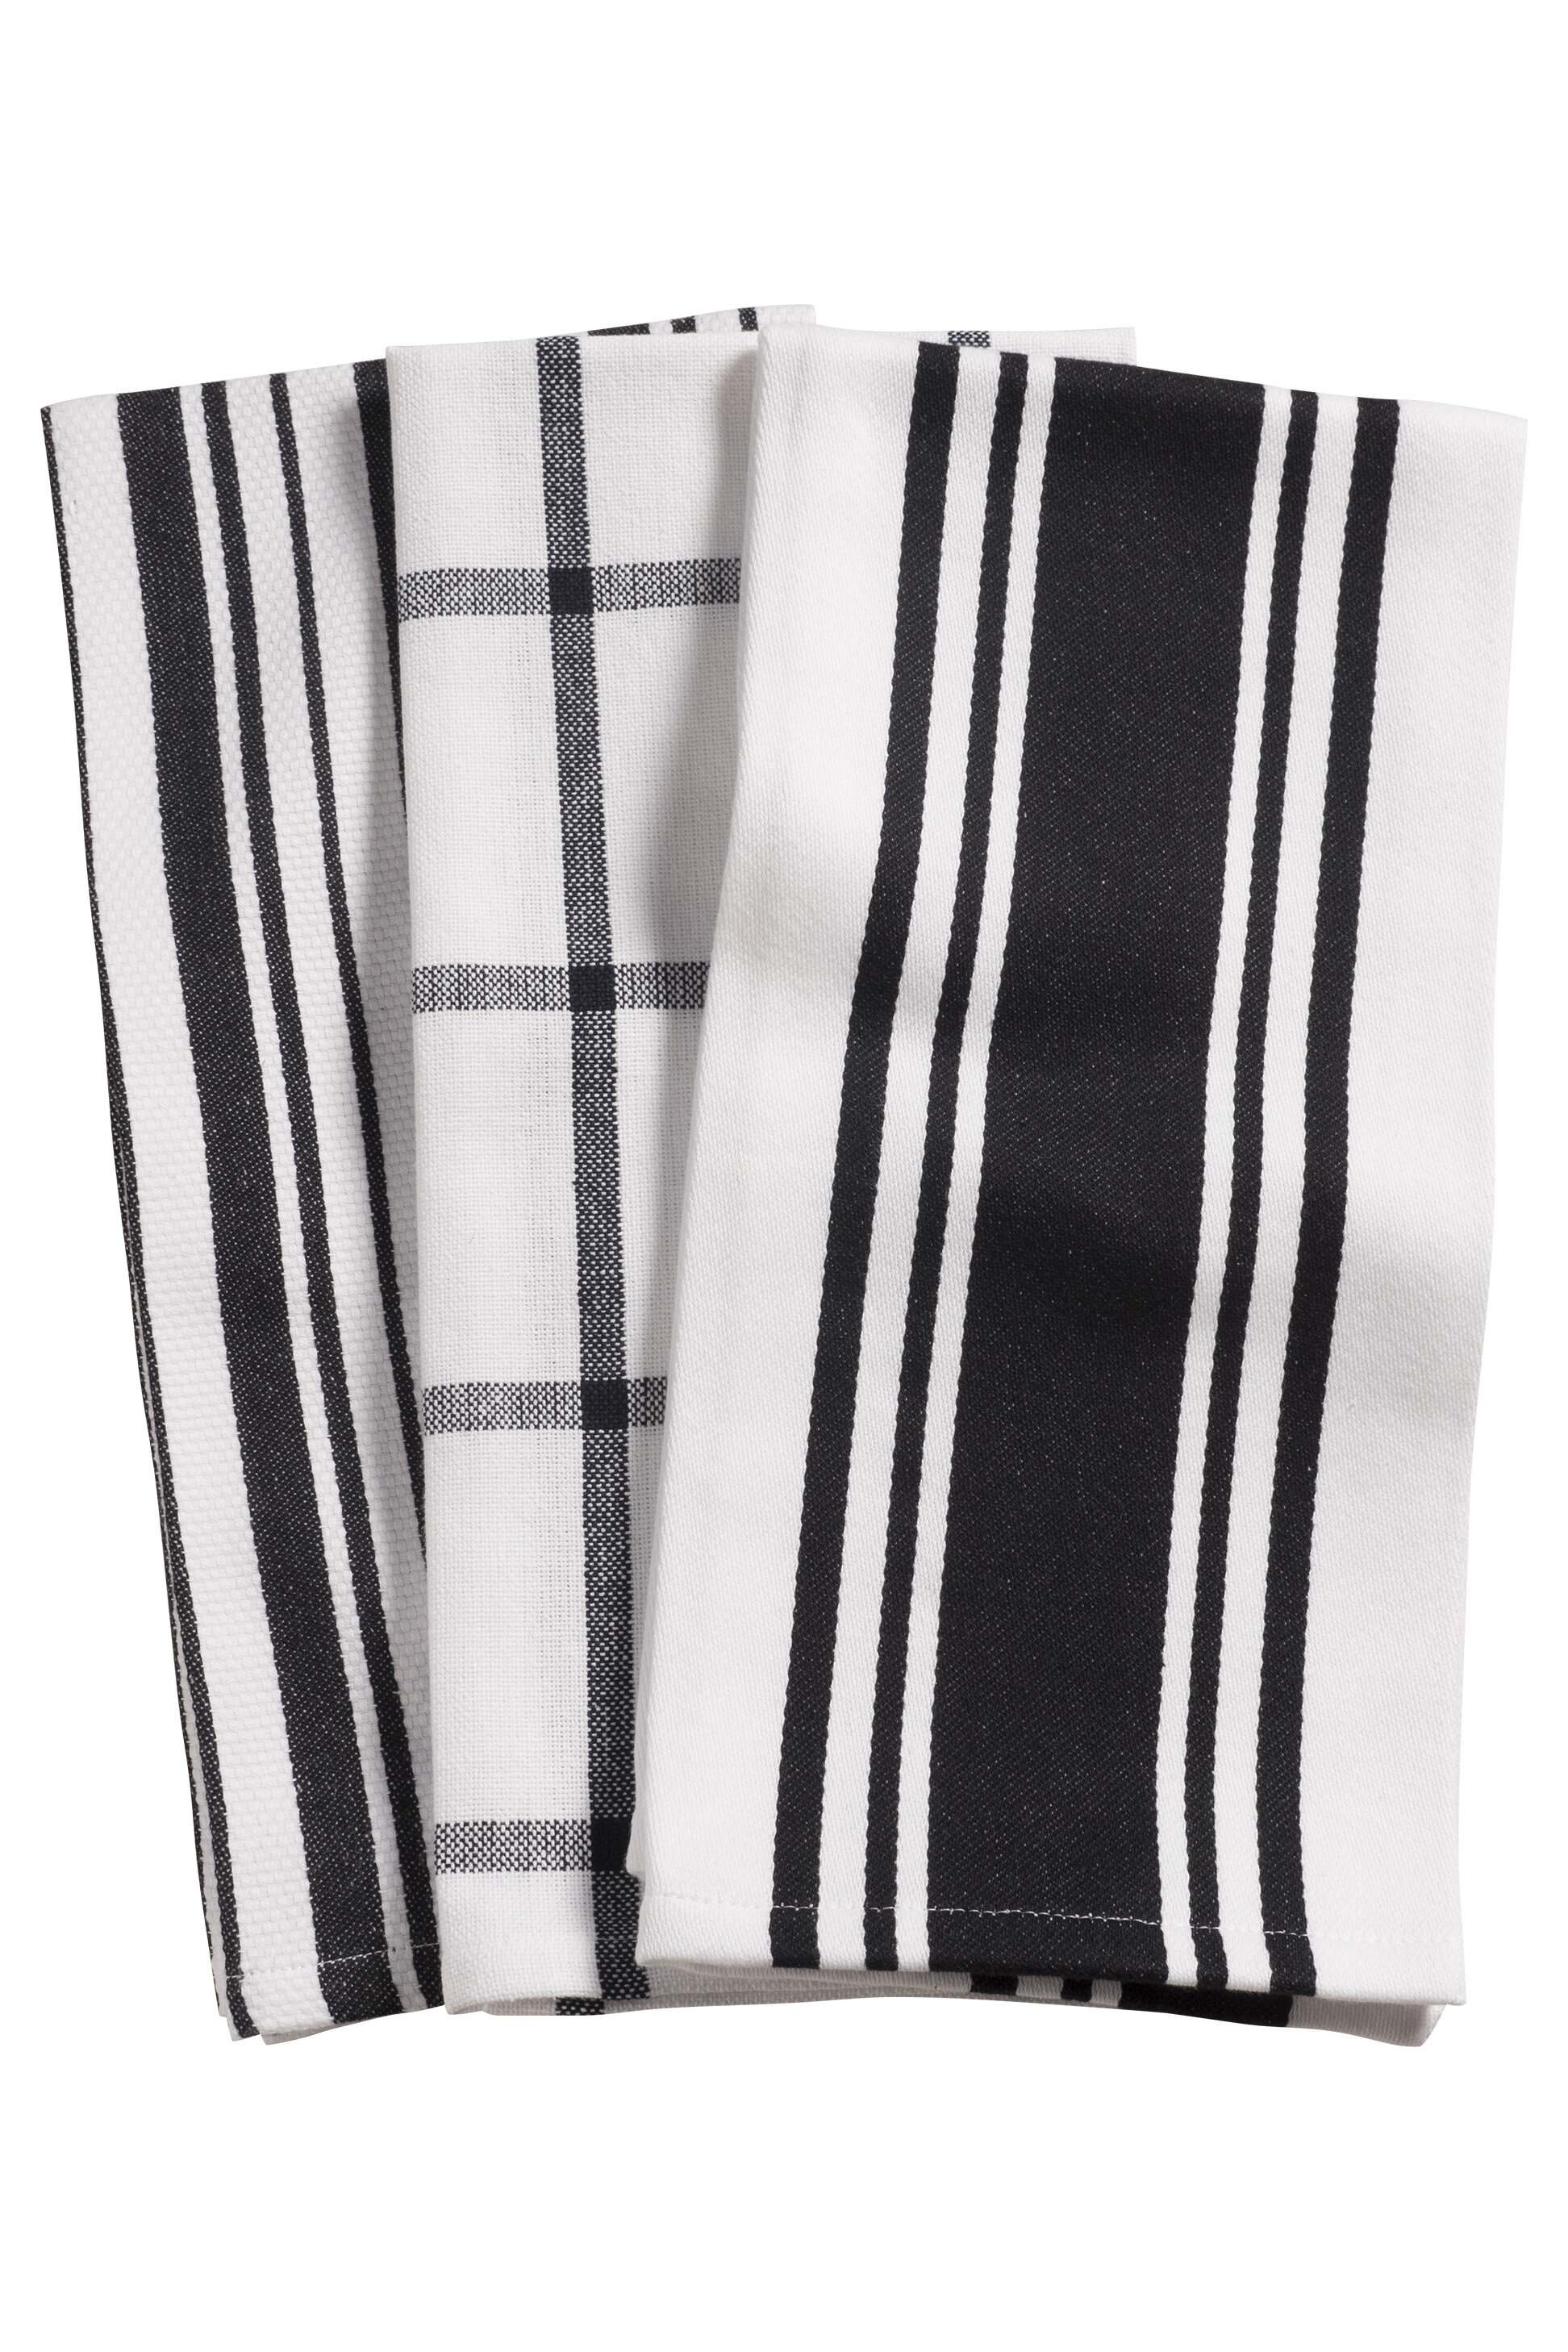 Kitchen Towels Dish Cloth 3 Pack Classic Black and White Checkered